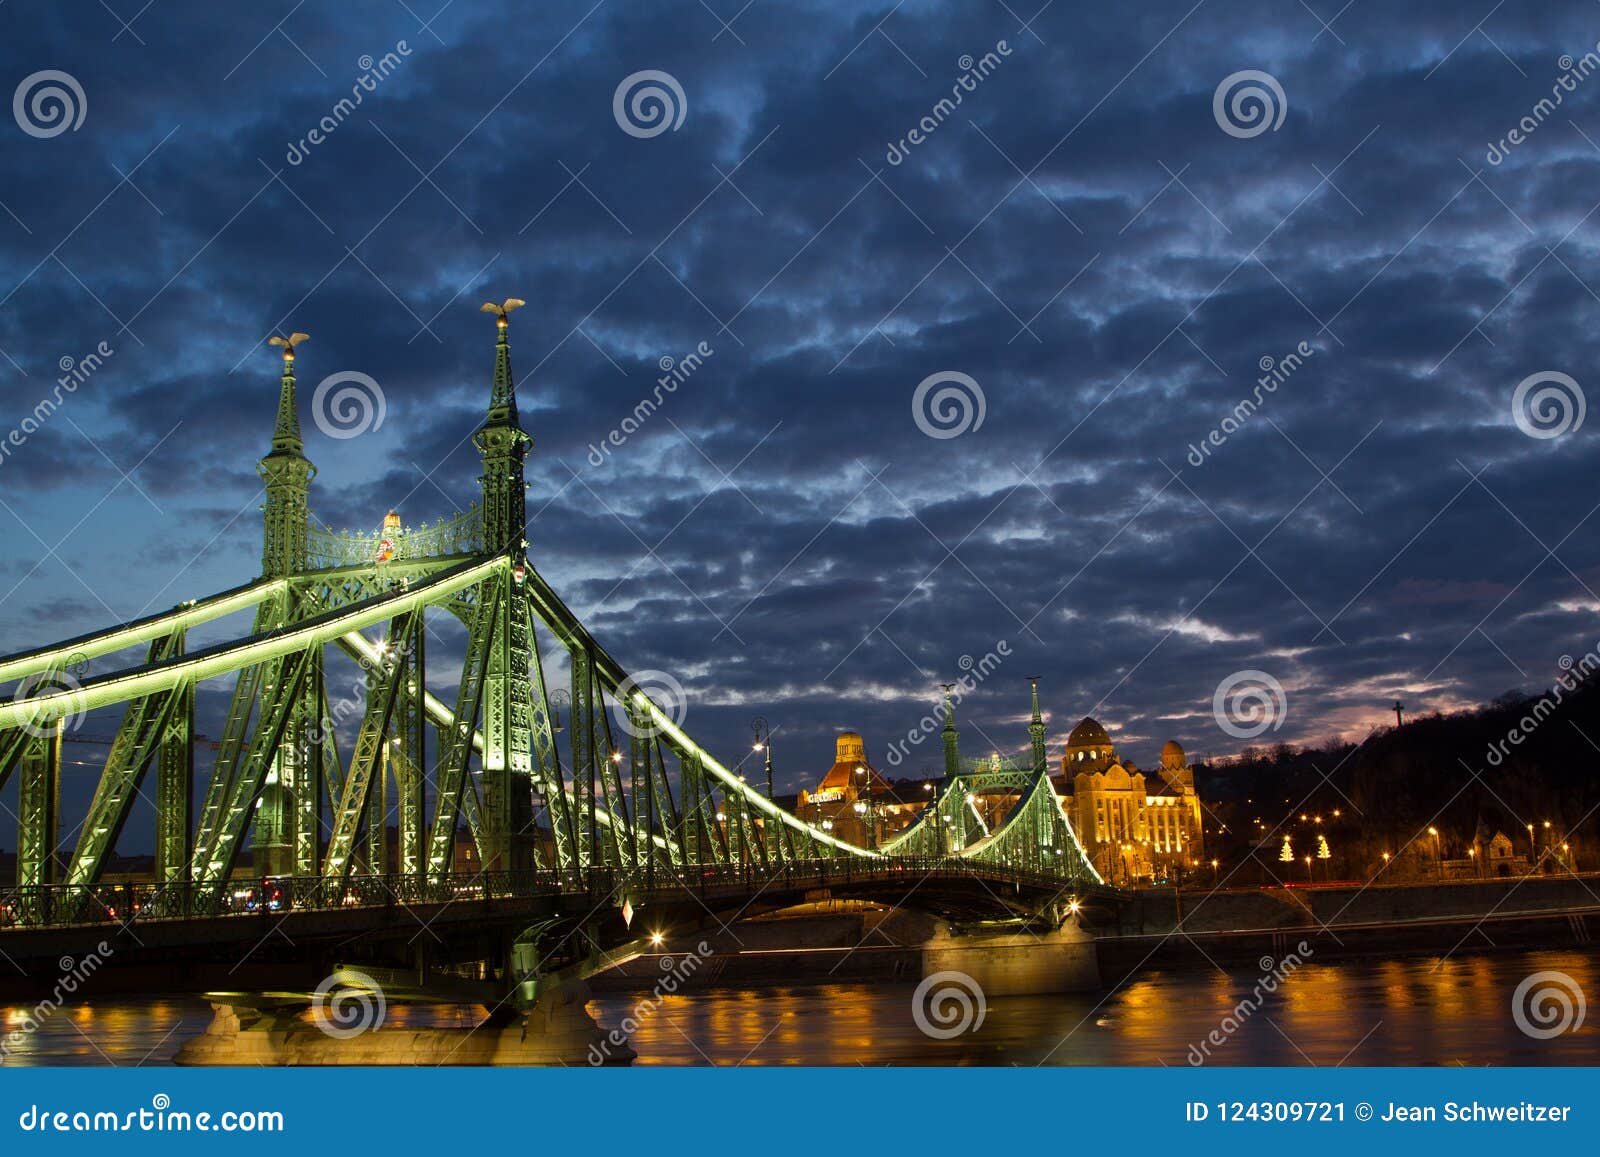 liberty bridge in budapest hungary at night with a nice cloudy s